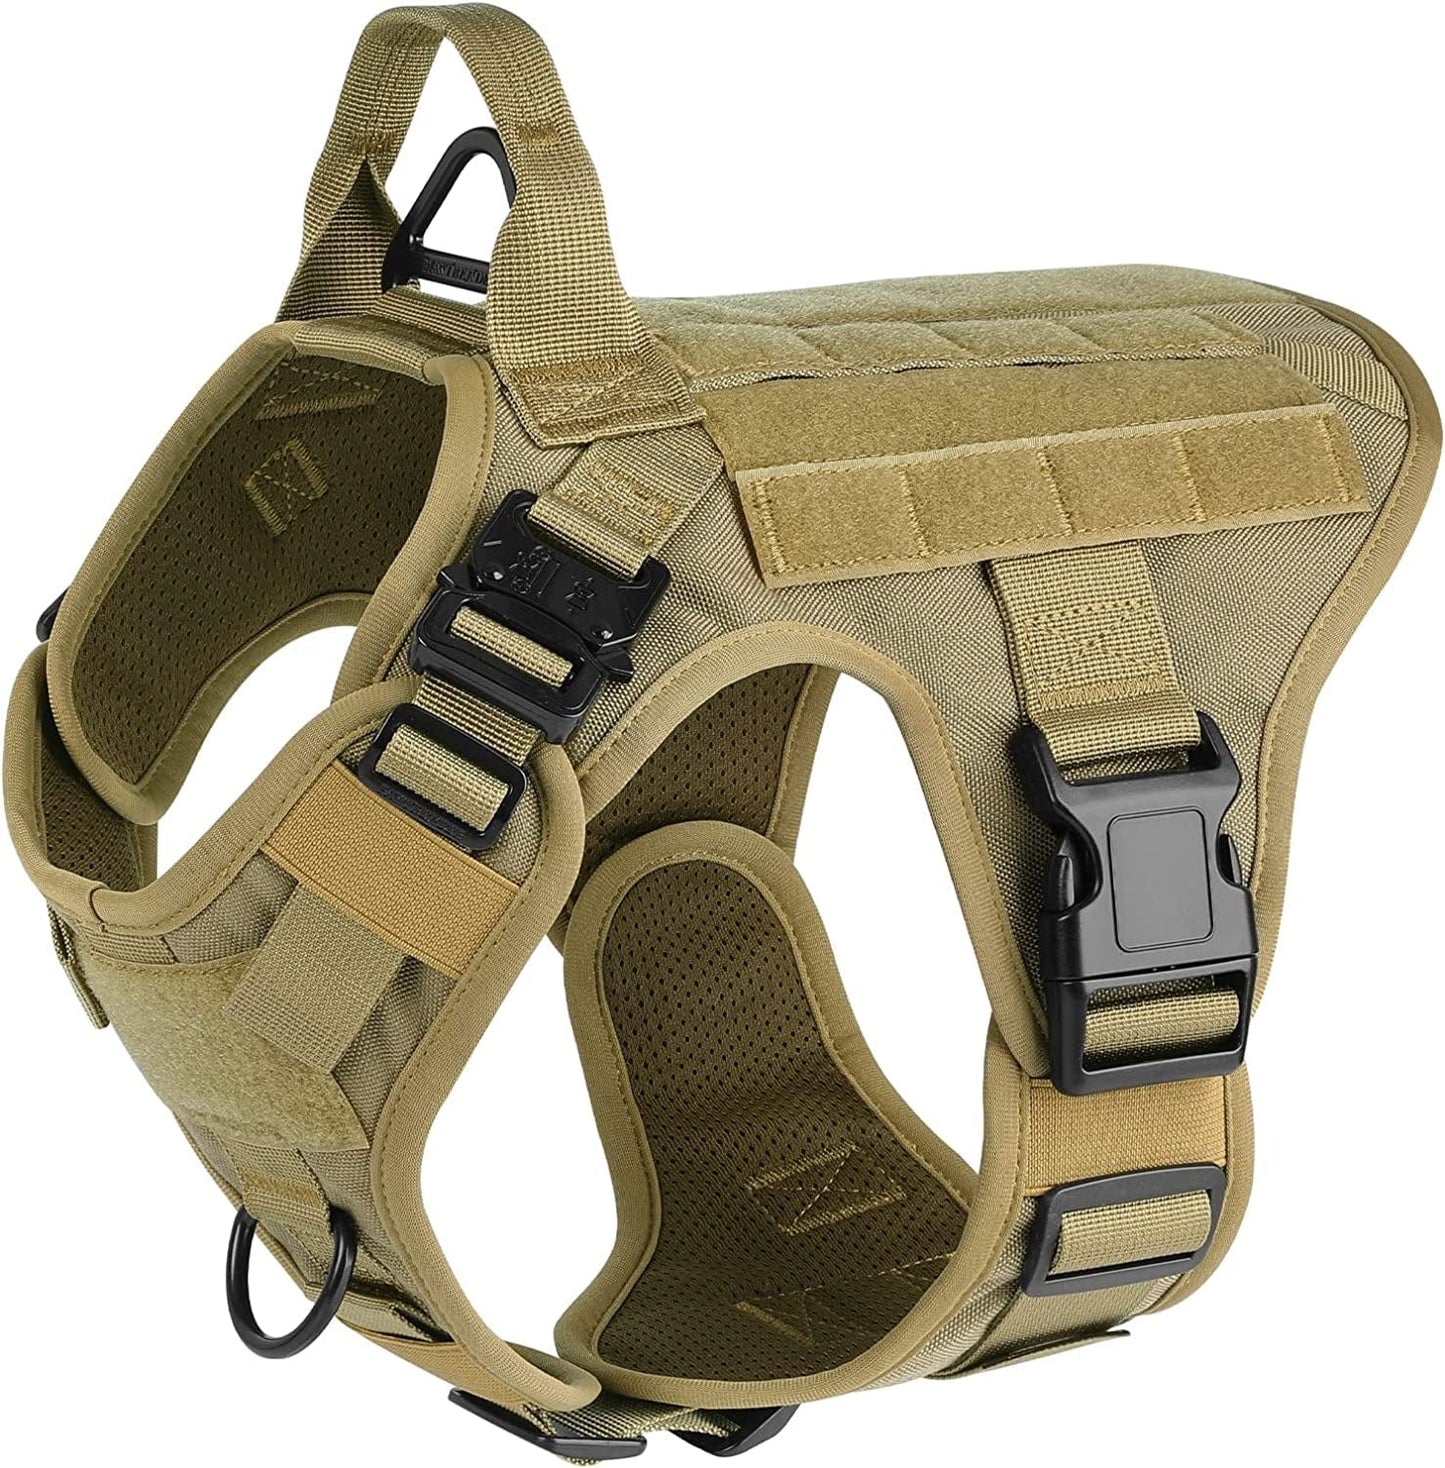 PAWTRENDER Tactical Dog Harness for Large Dogs No Pull, Adjustable Service Dog Vest Harness with Handle, Heavy Duty Big Dog Harness for Walking Running Training Working Hiking, Black, L Animals & Pet Supplies > Pet Supplies > Dog Supplies > Dog Apparel PAWTRENDER Brown Medium 